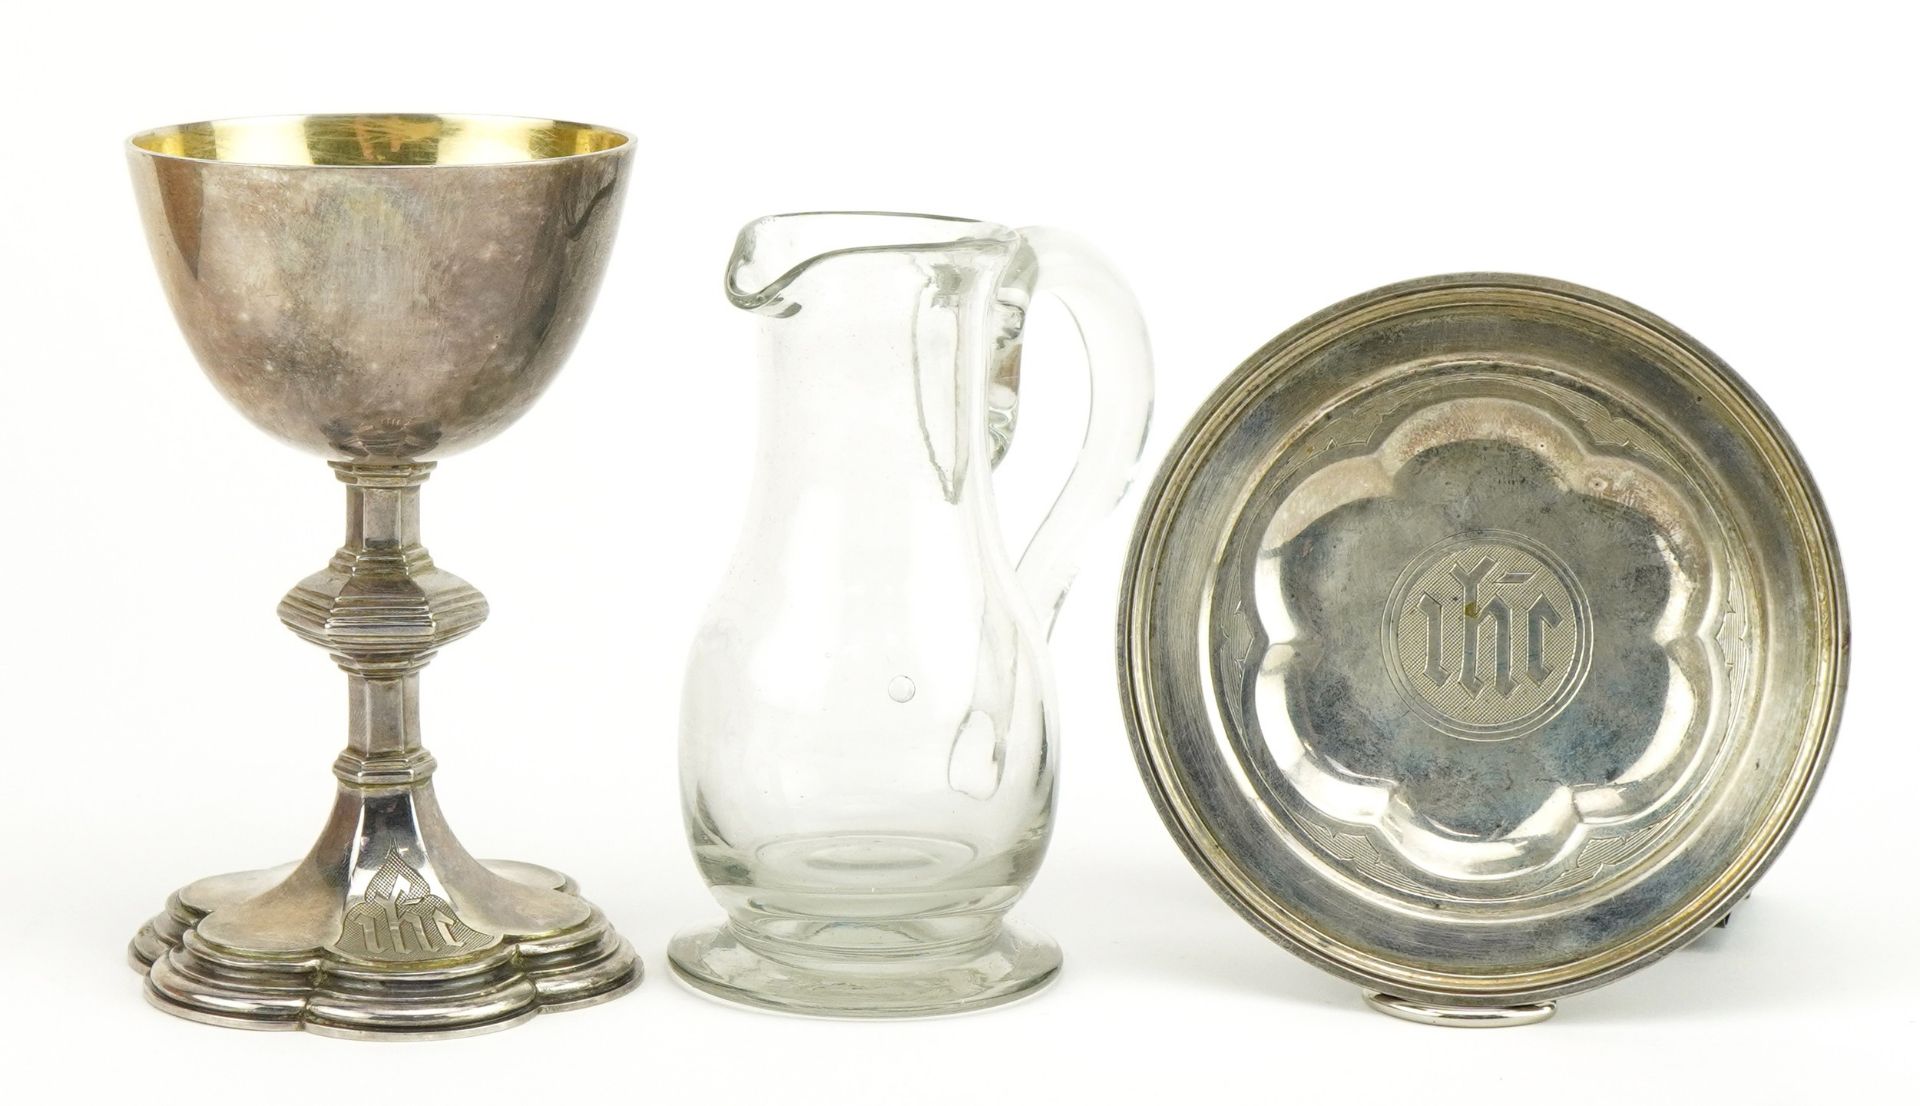 Richards & Brown, Victorian ecclesiastical silver holy communion set comprising chalice and plate - Image 3 of 7